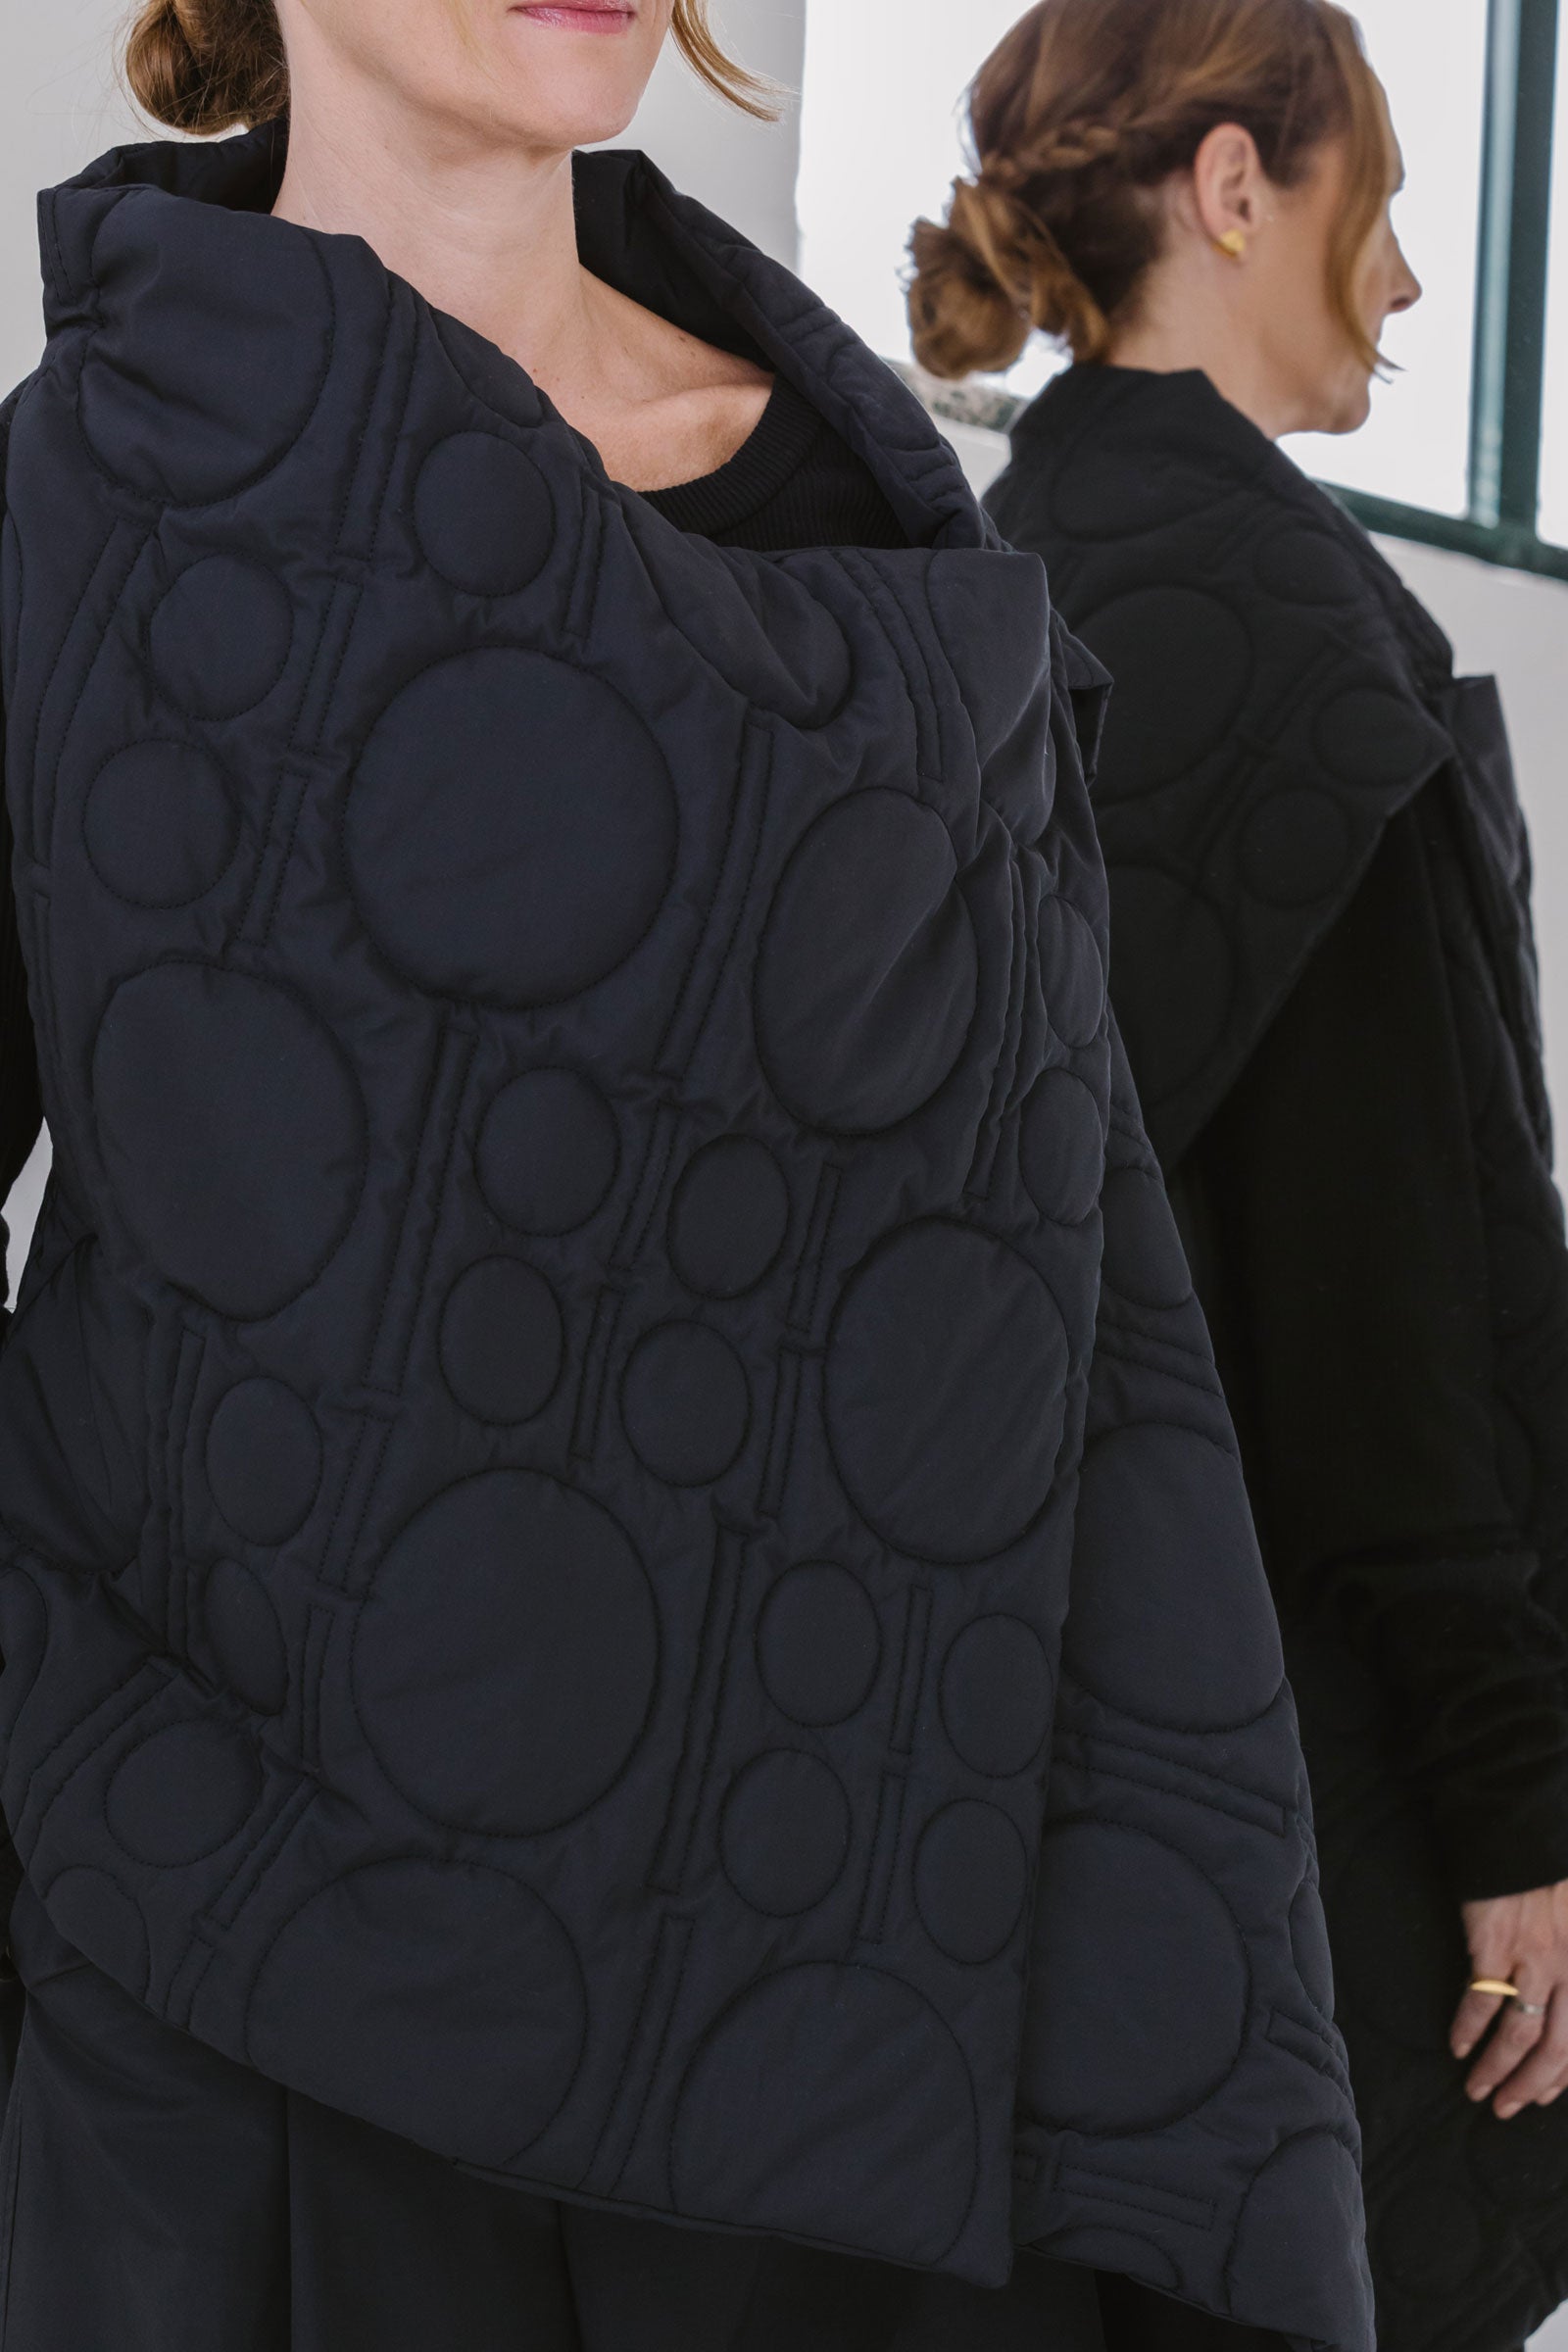 10 to 10 padded vest closeup